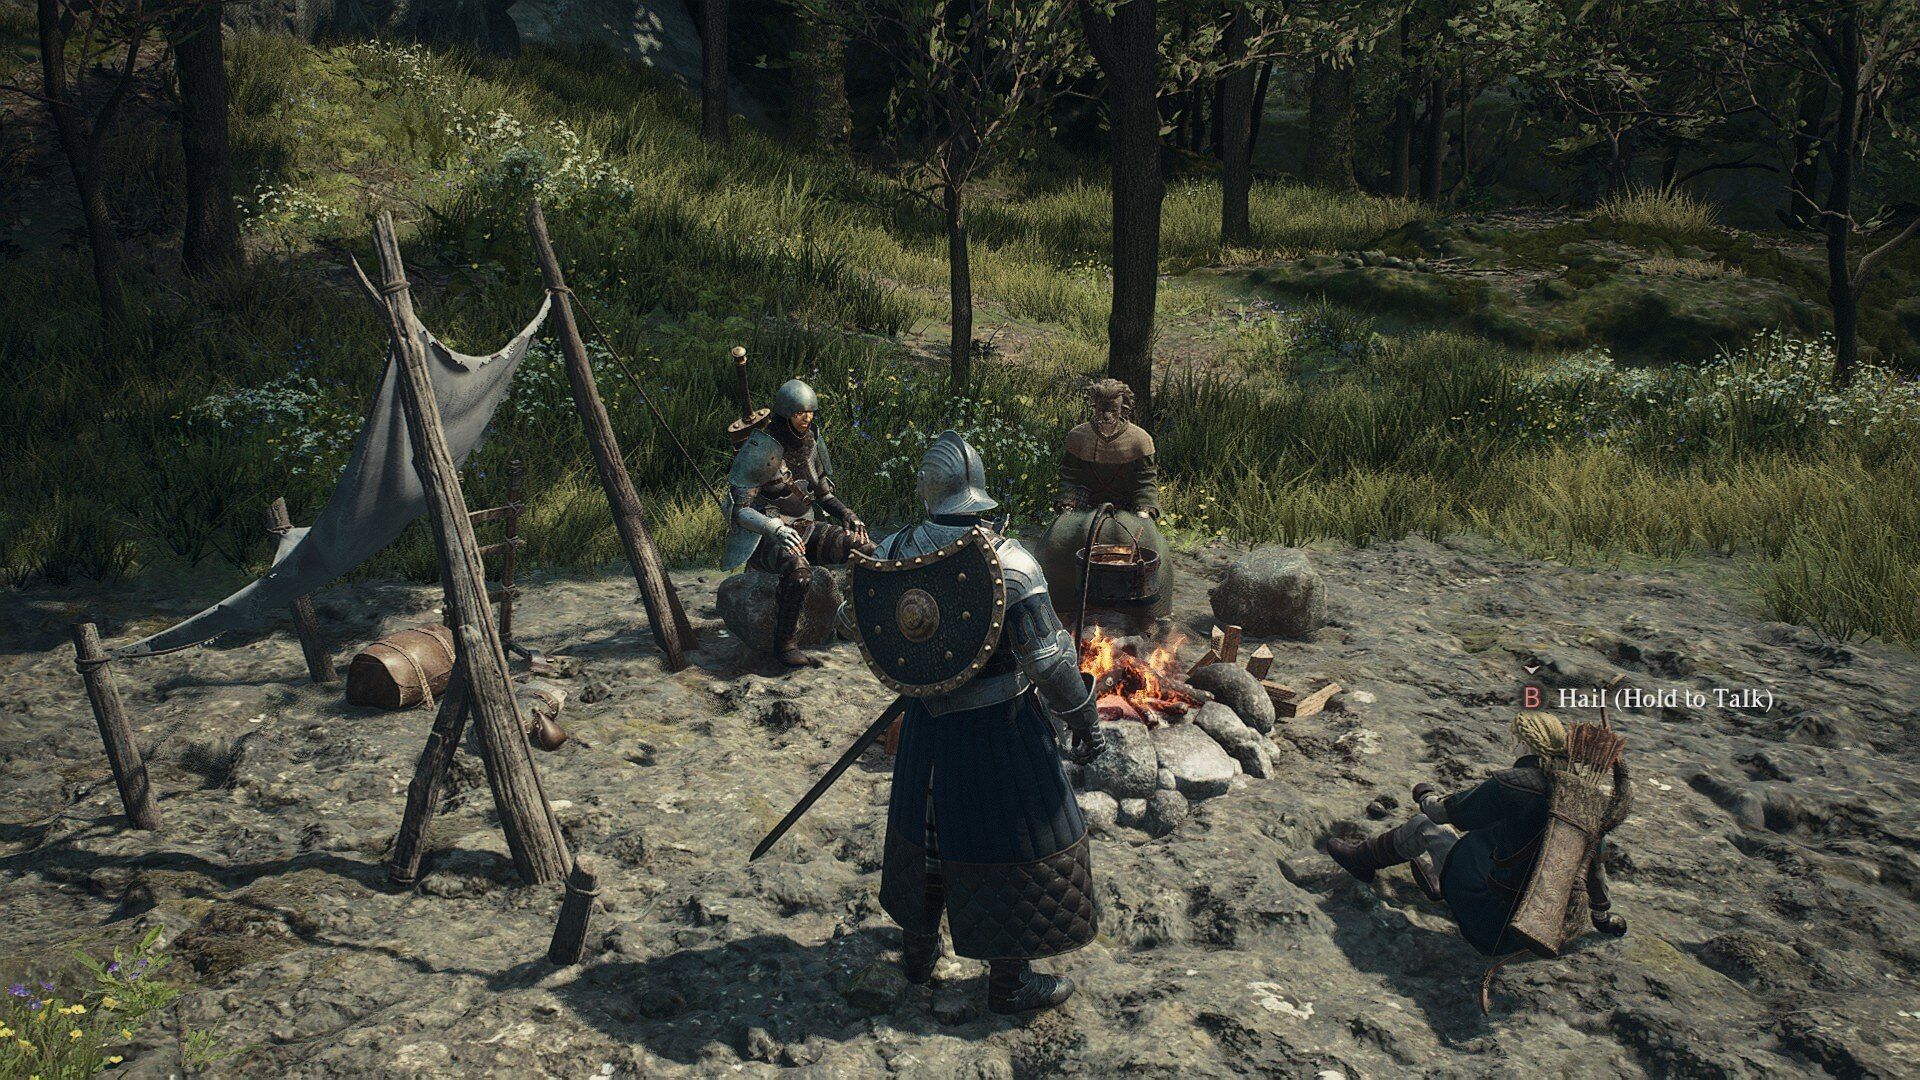 Camping with the boys! What more can an Arisen ask for? (Image via Capcom)